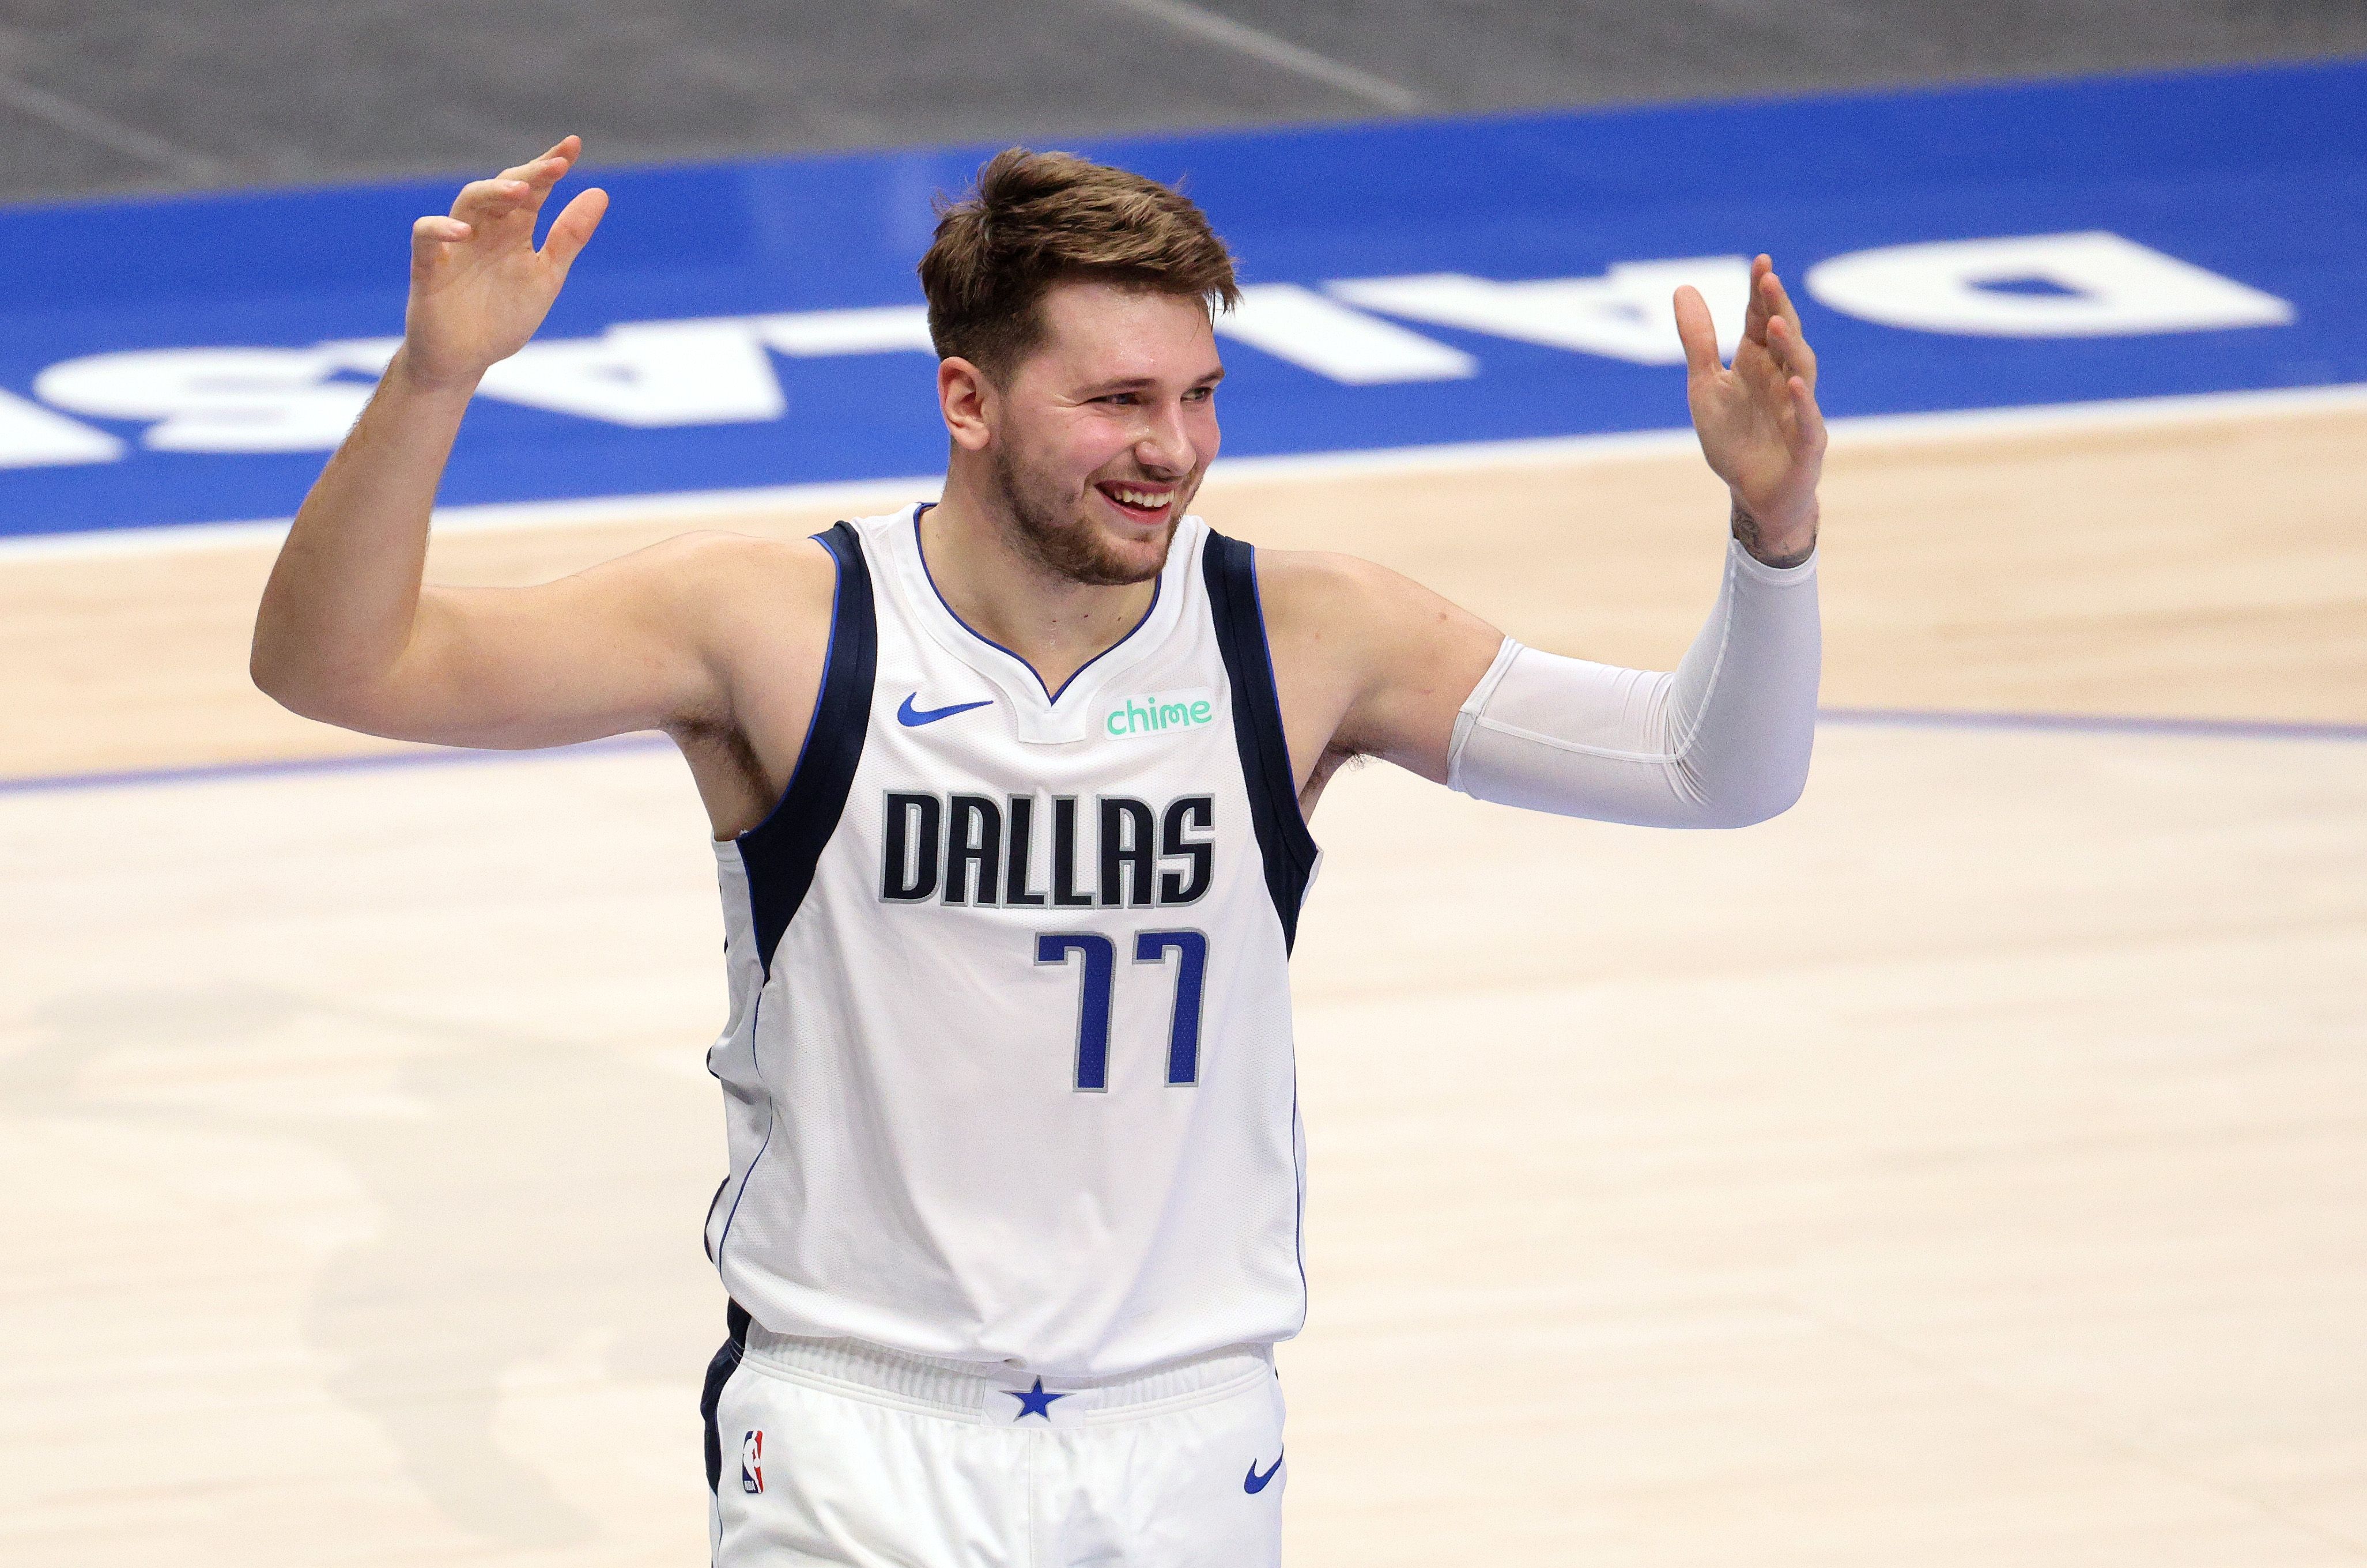 Luka Doncic reaction after receiving a foul call